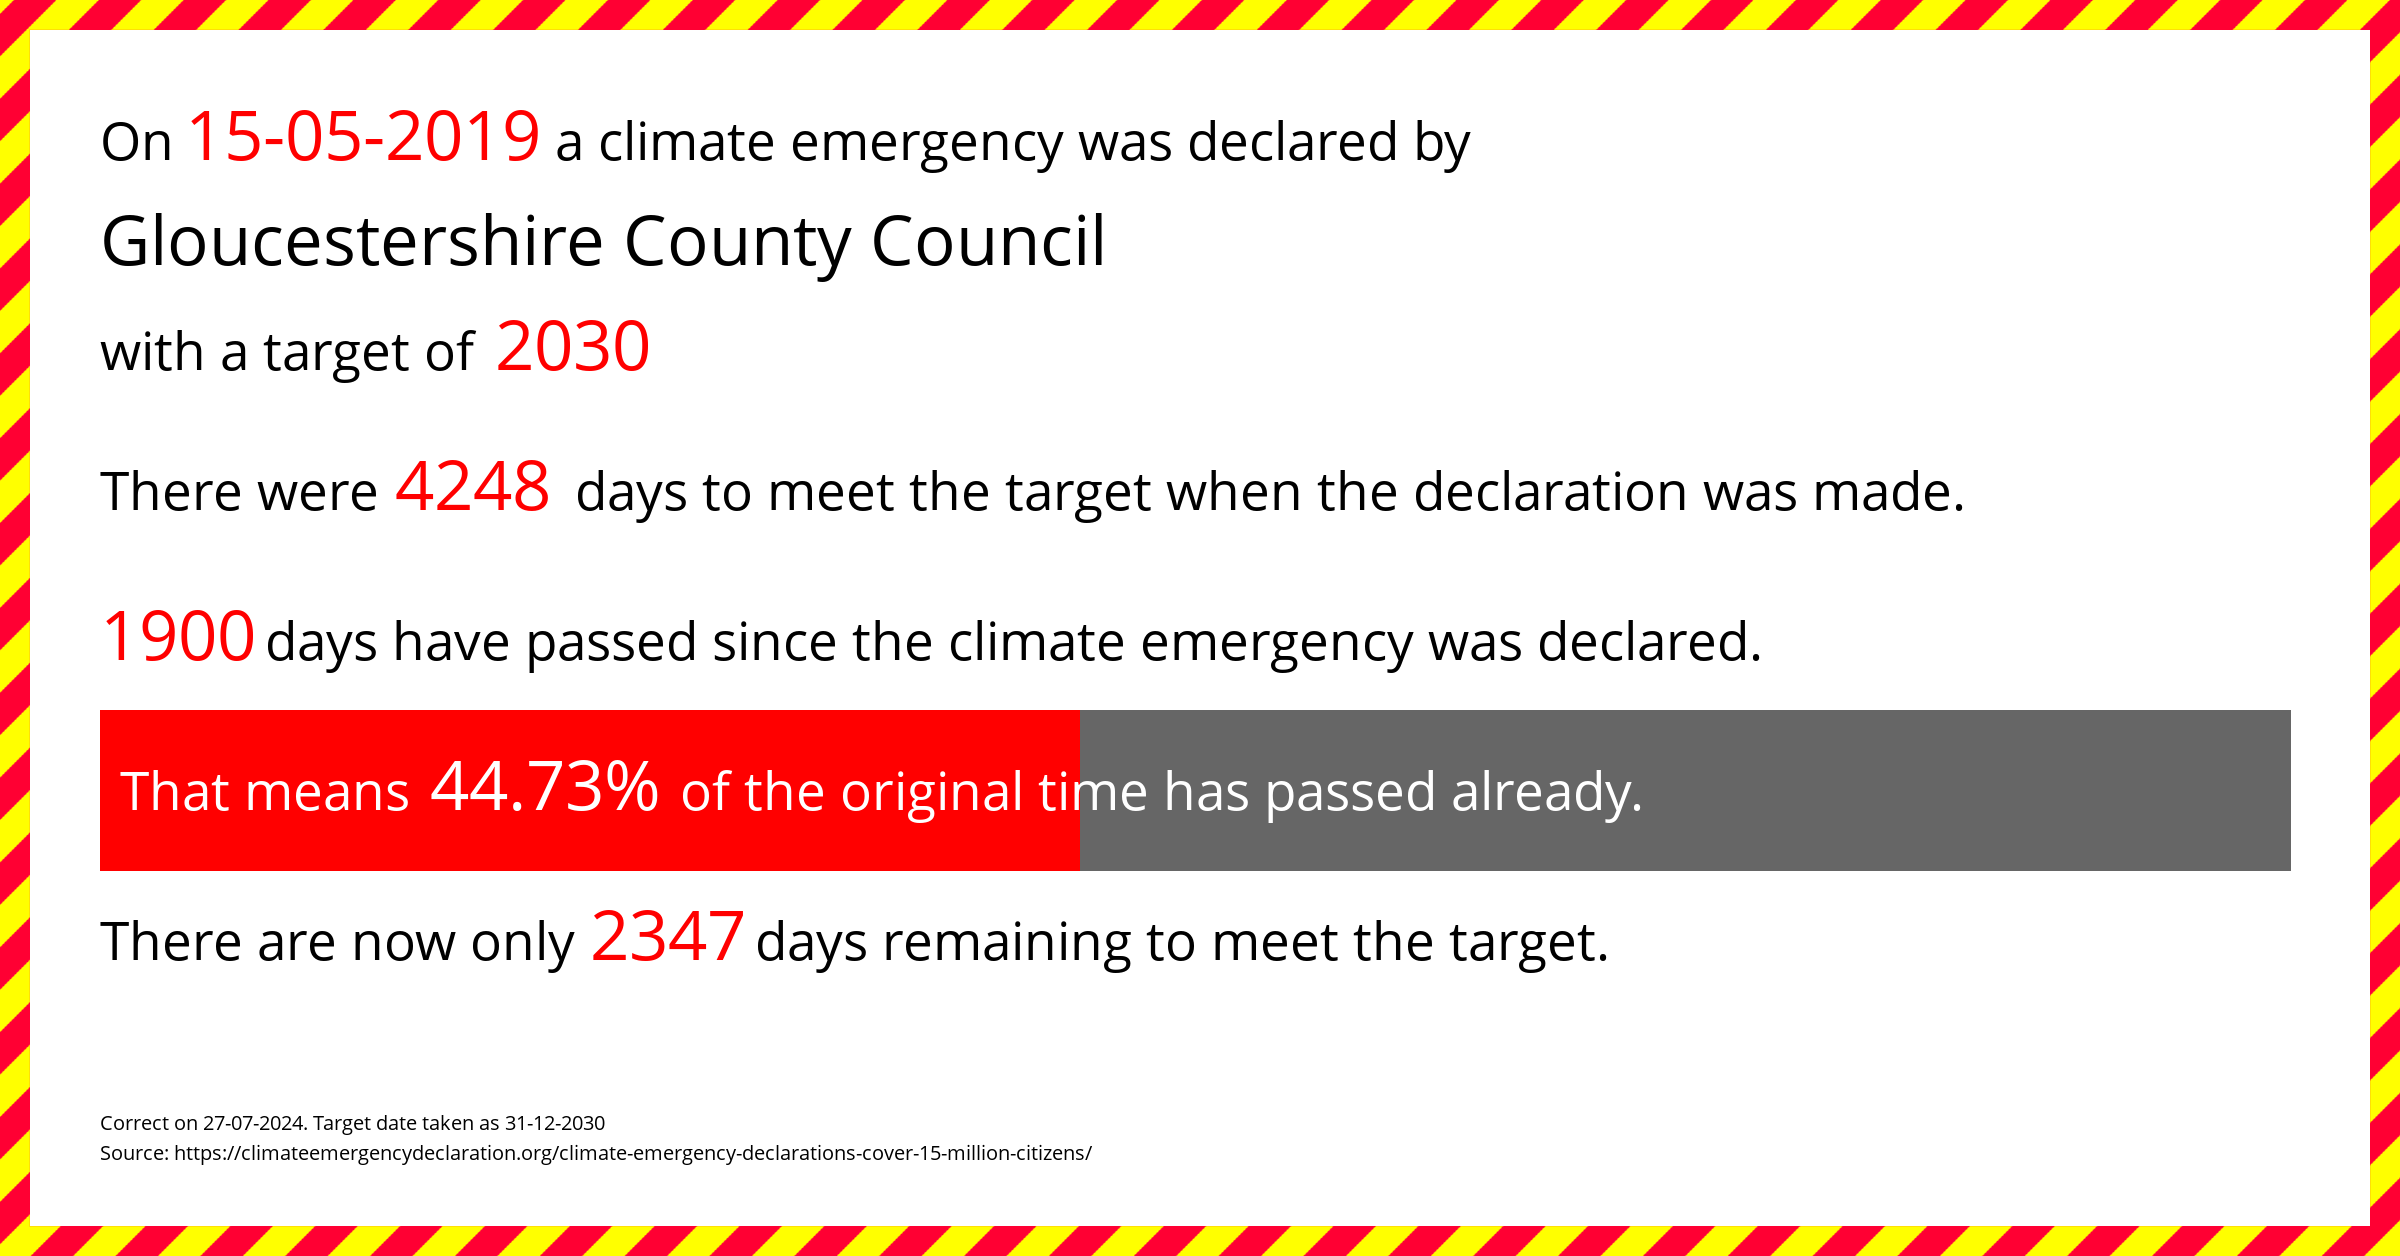 Gloucestershire County Council declared a Climate emergency on Wednesday 15th May 2019, with a target of 2030.